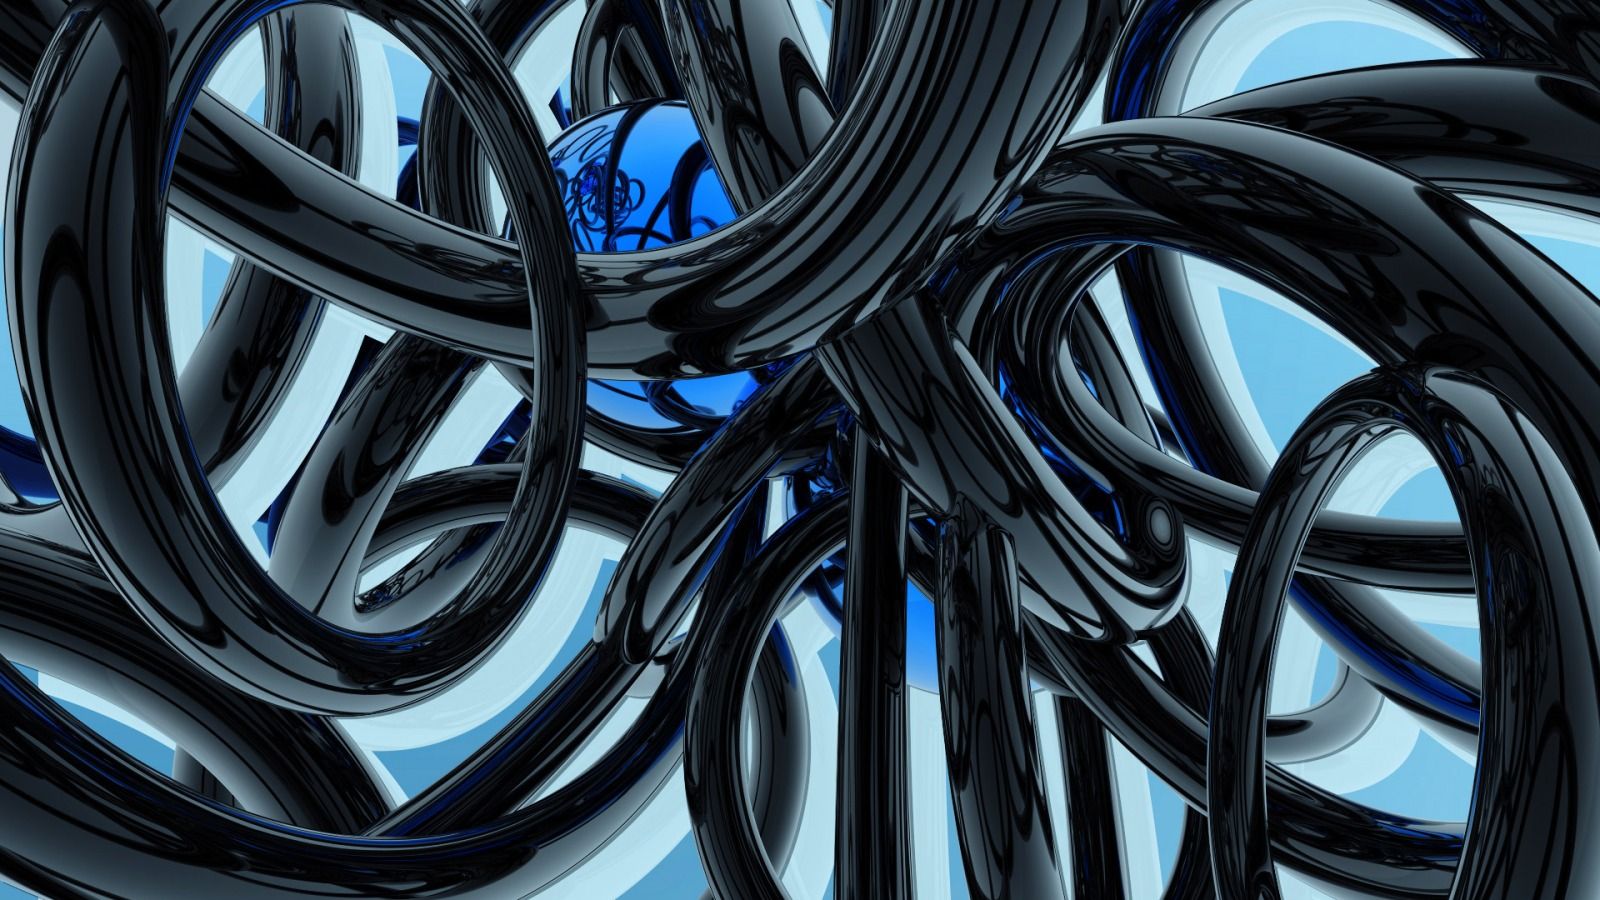 Black and Blue Wallpaper Abstract 3D Wallpaper in jpg format for free download